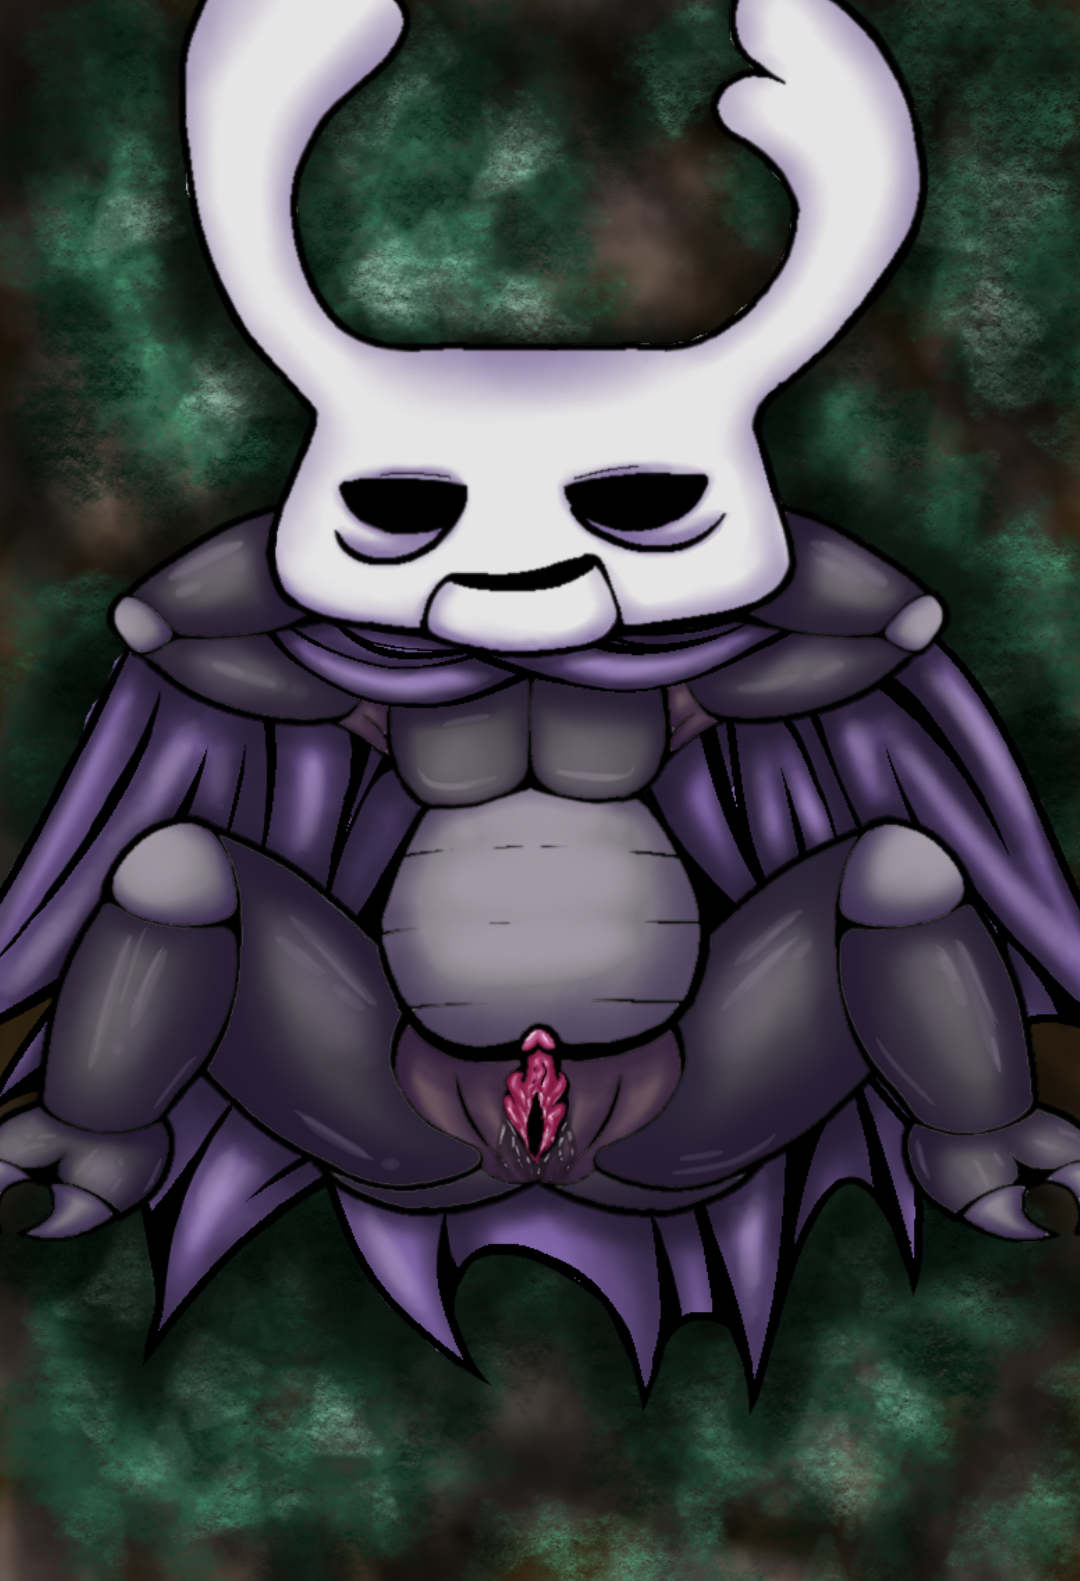 Post 5325965: Hollow_Knight zote Zote_the_Mighty